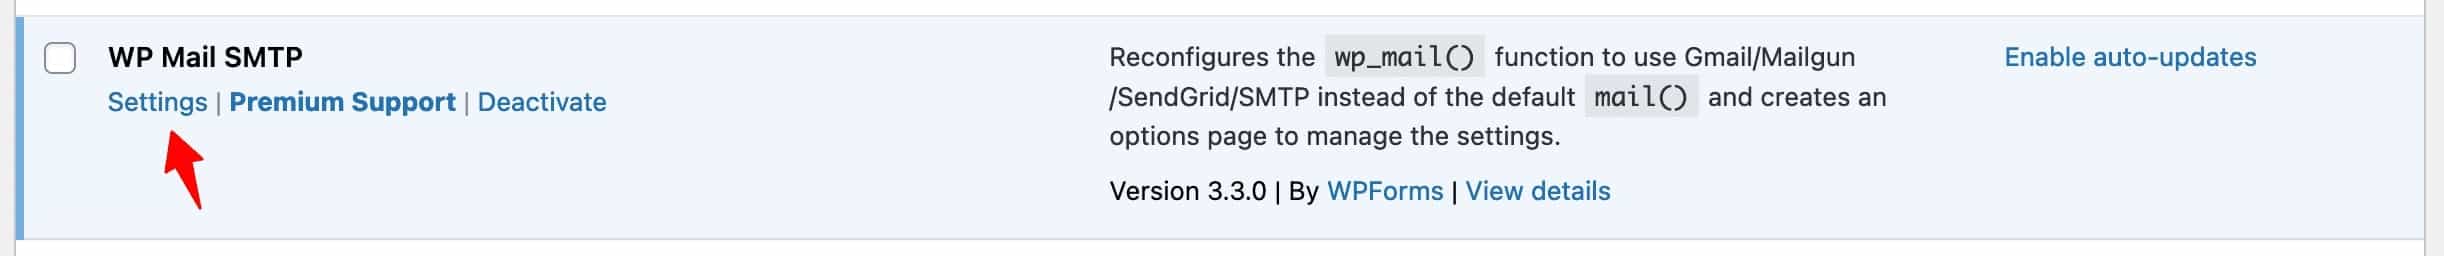 Here, we will use the WP Mail SMTP plugin on our WordPress website